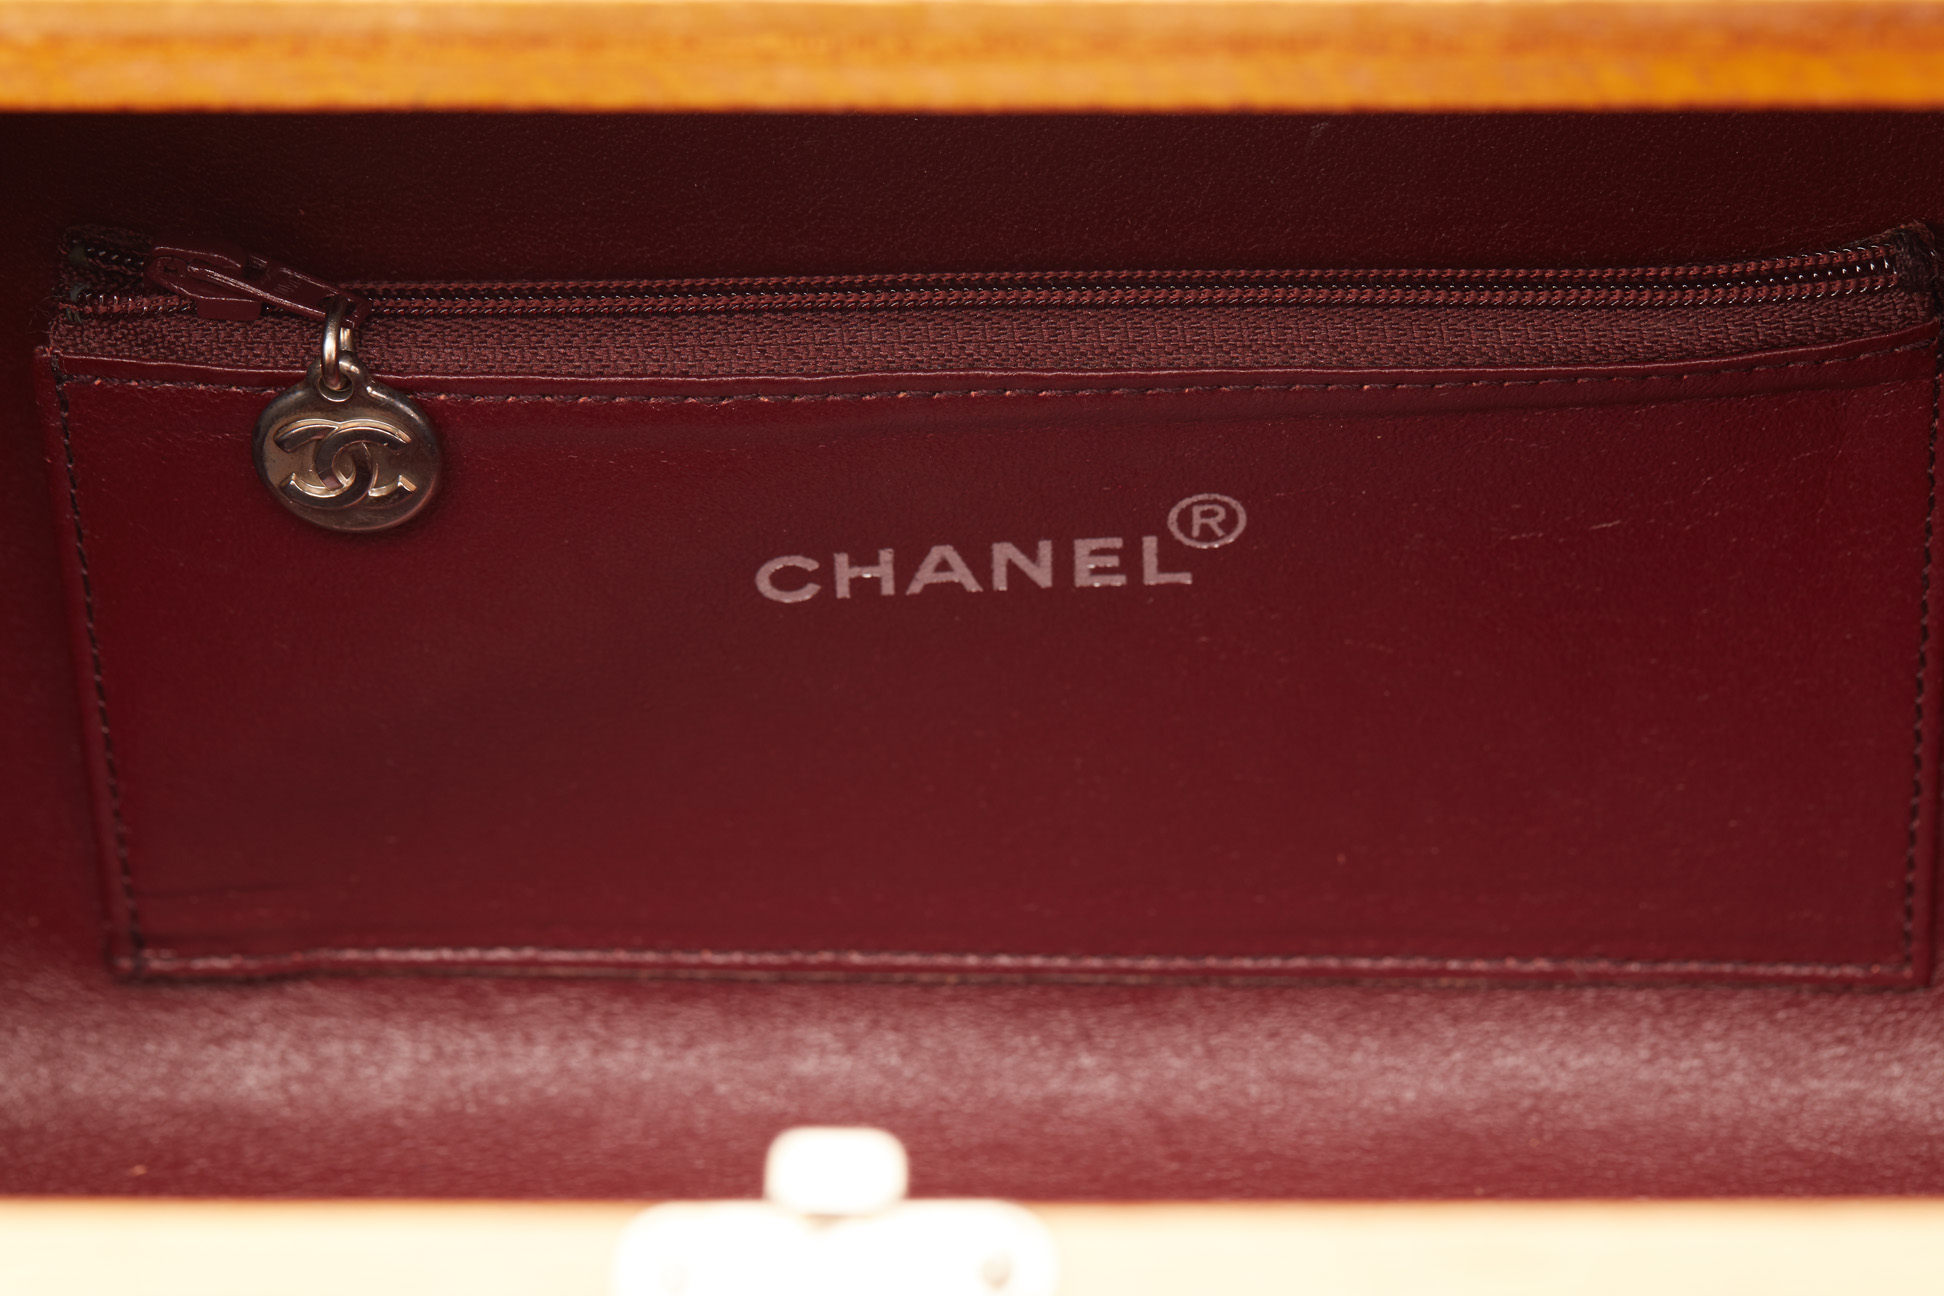 A CHANEL LIMITED EDITION WOOD CRUISE TRUNK BAG - Image 10 of 16